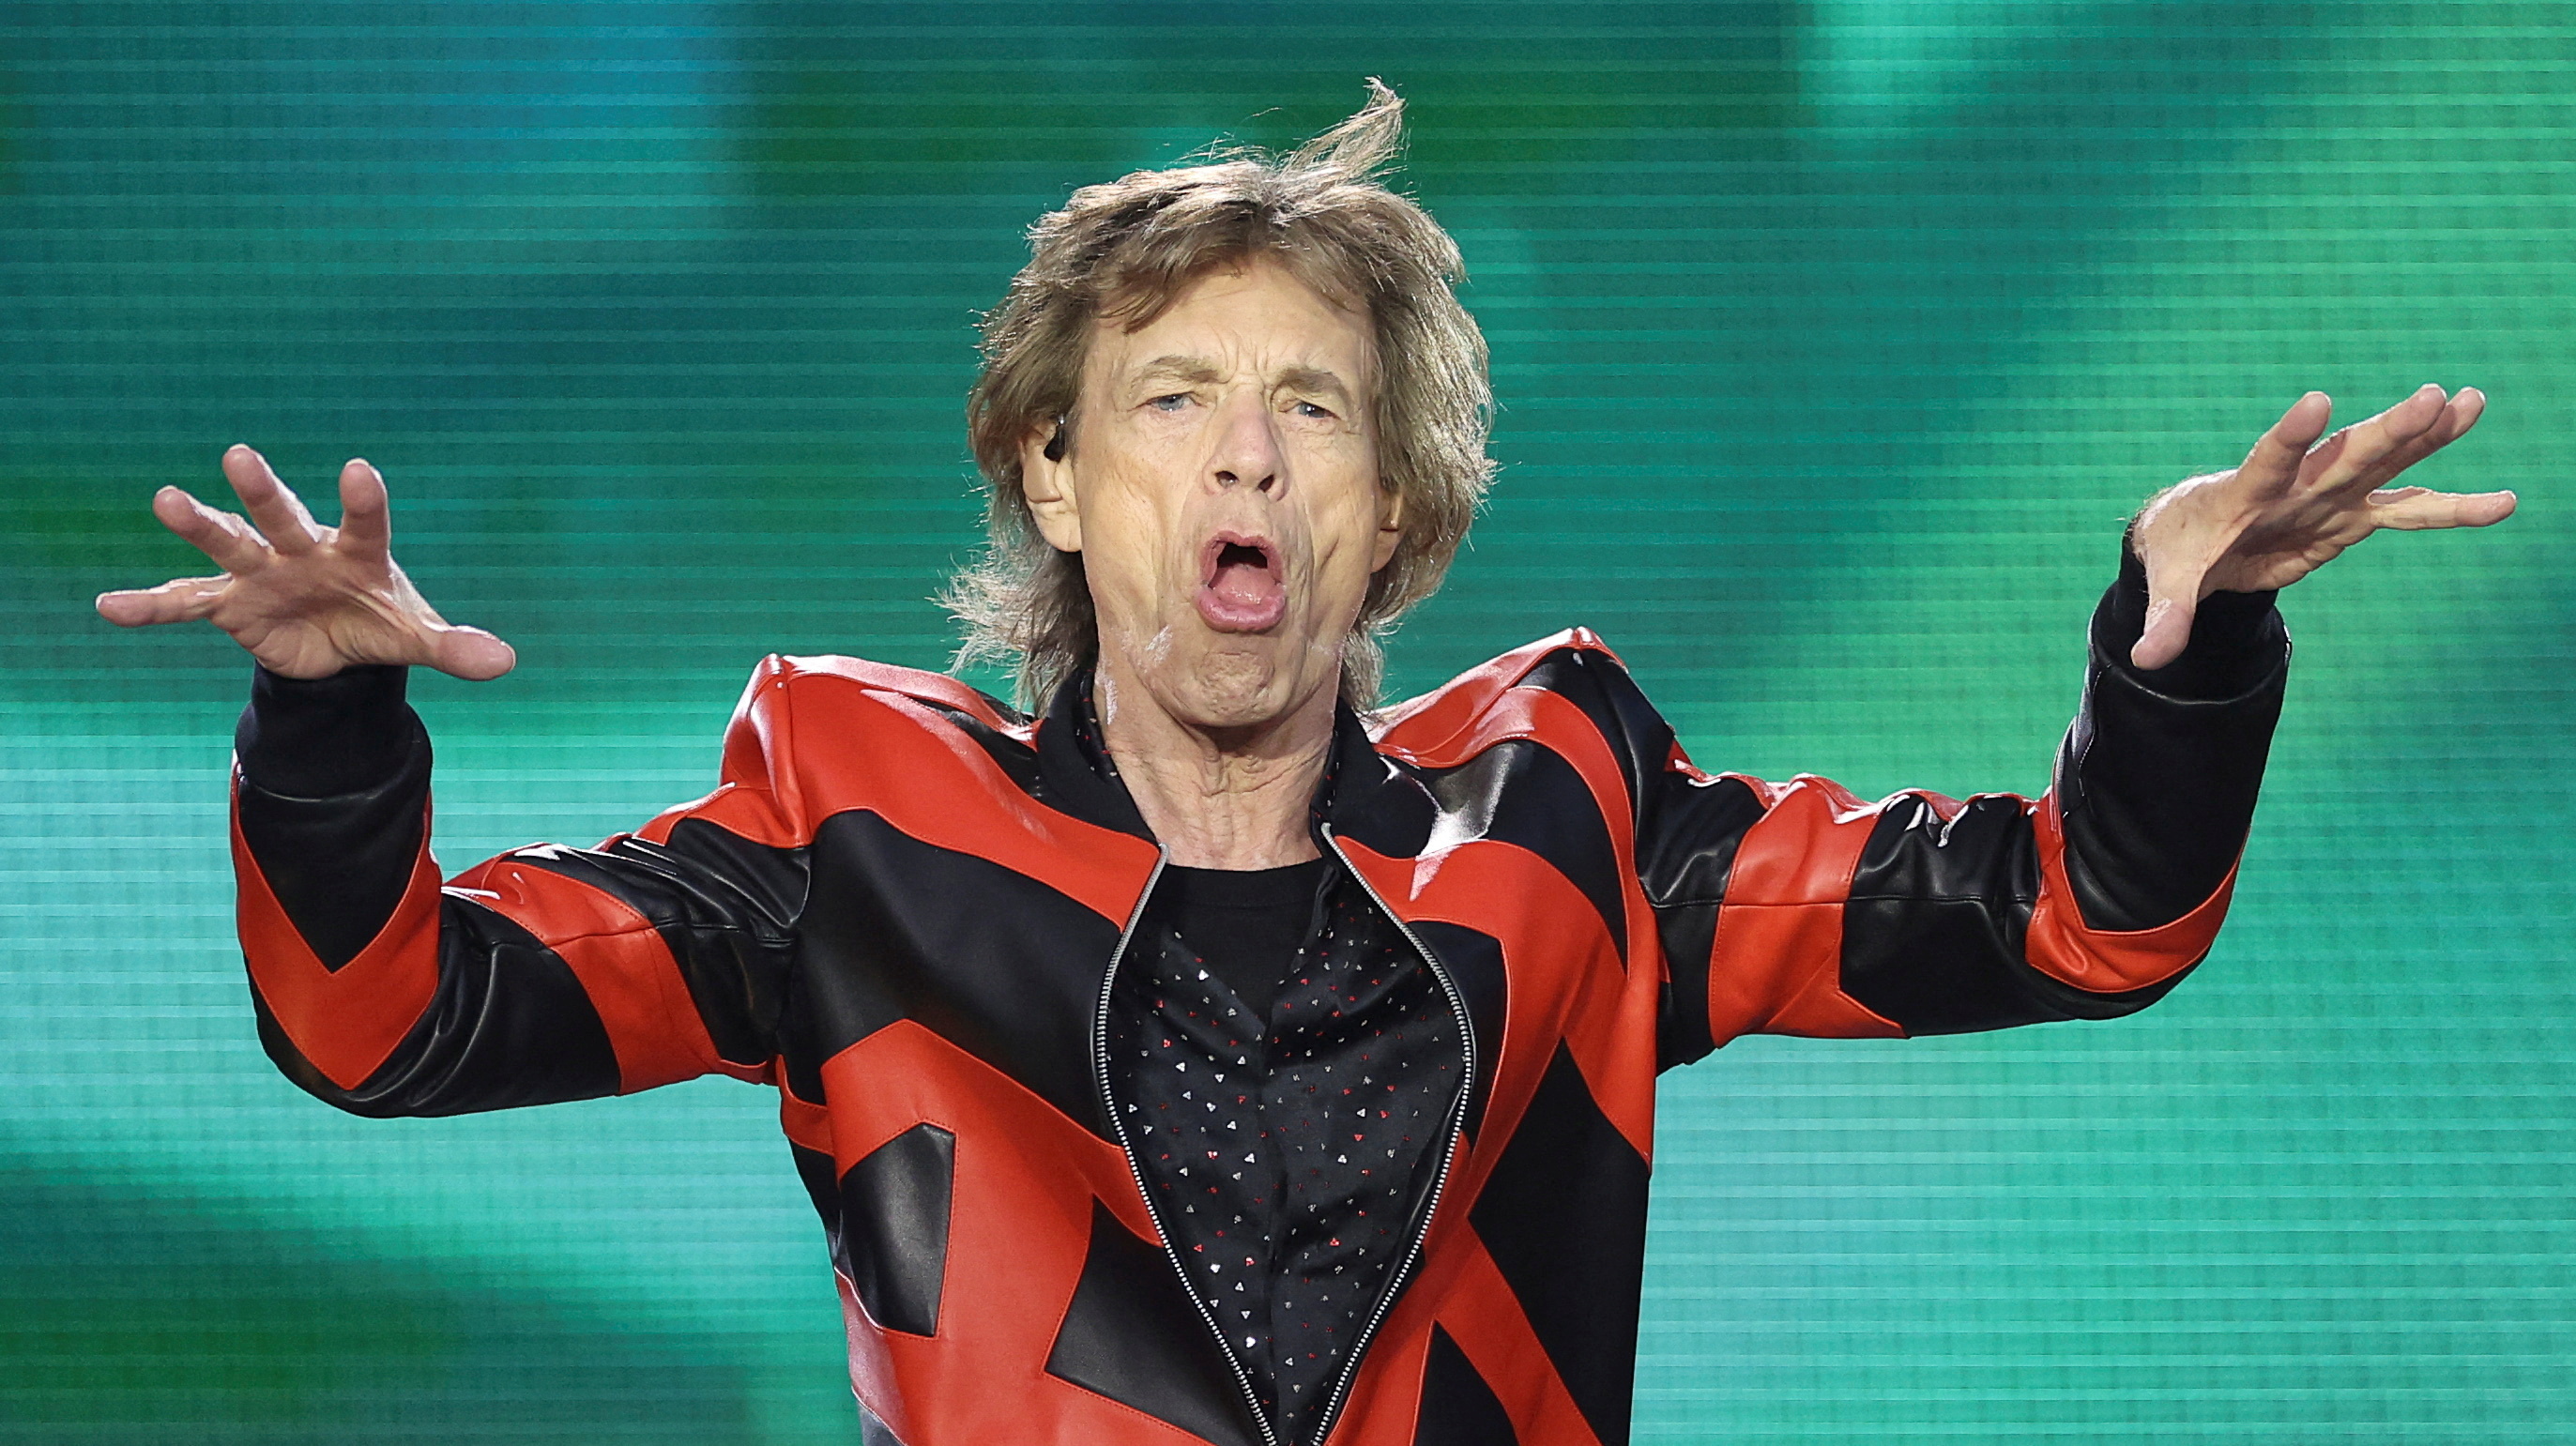 Mick Jagger quarantines with COVID, second Rolling Stones show scrapped |  Reuters